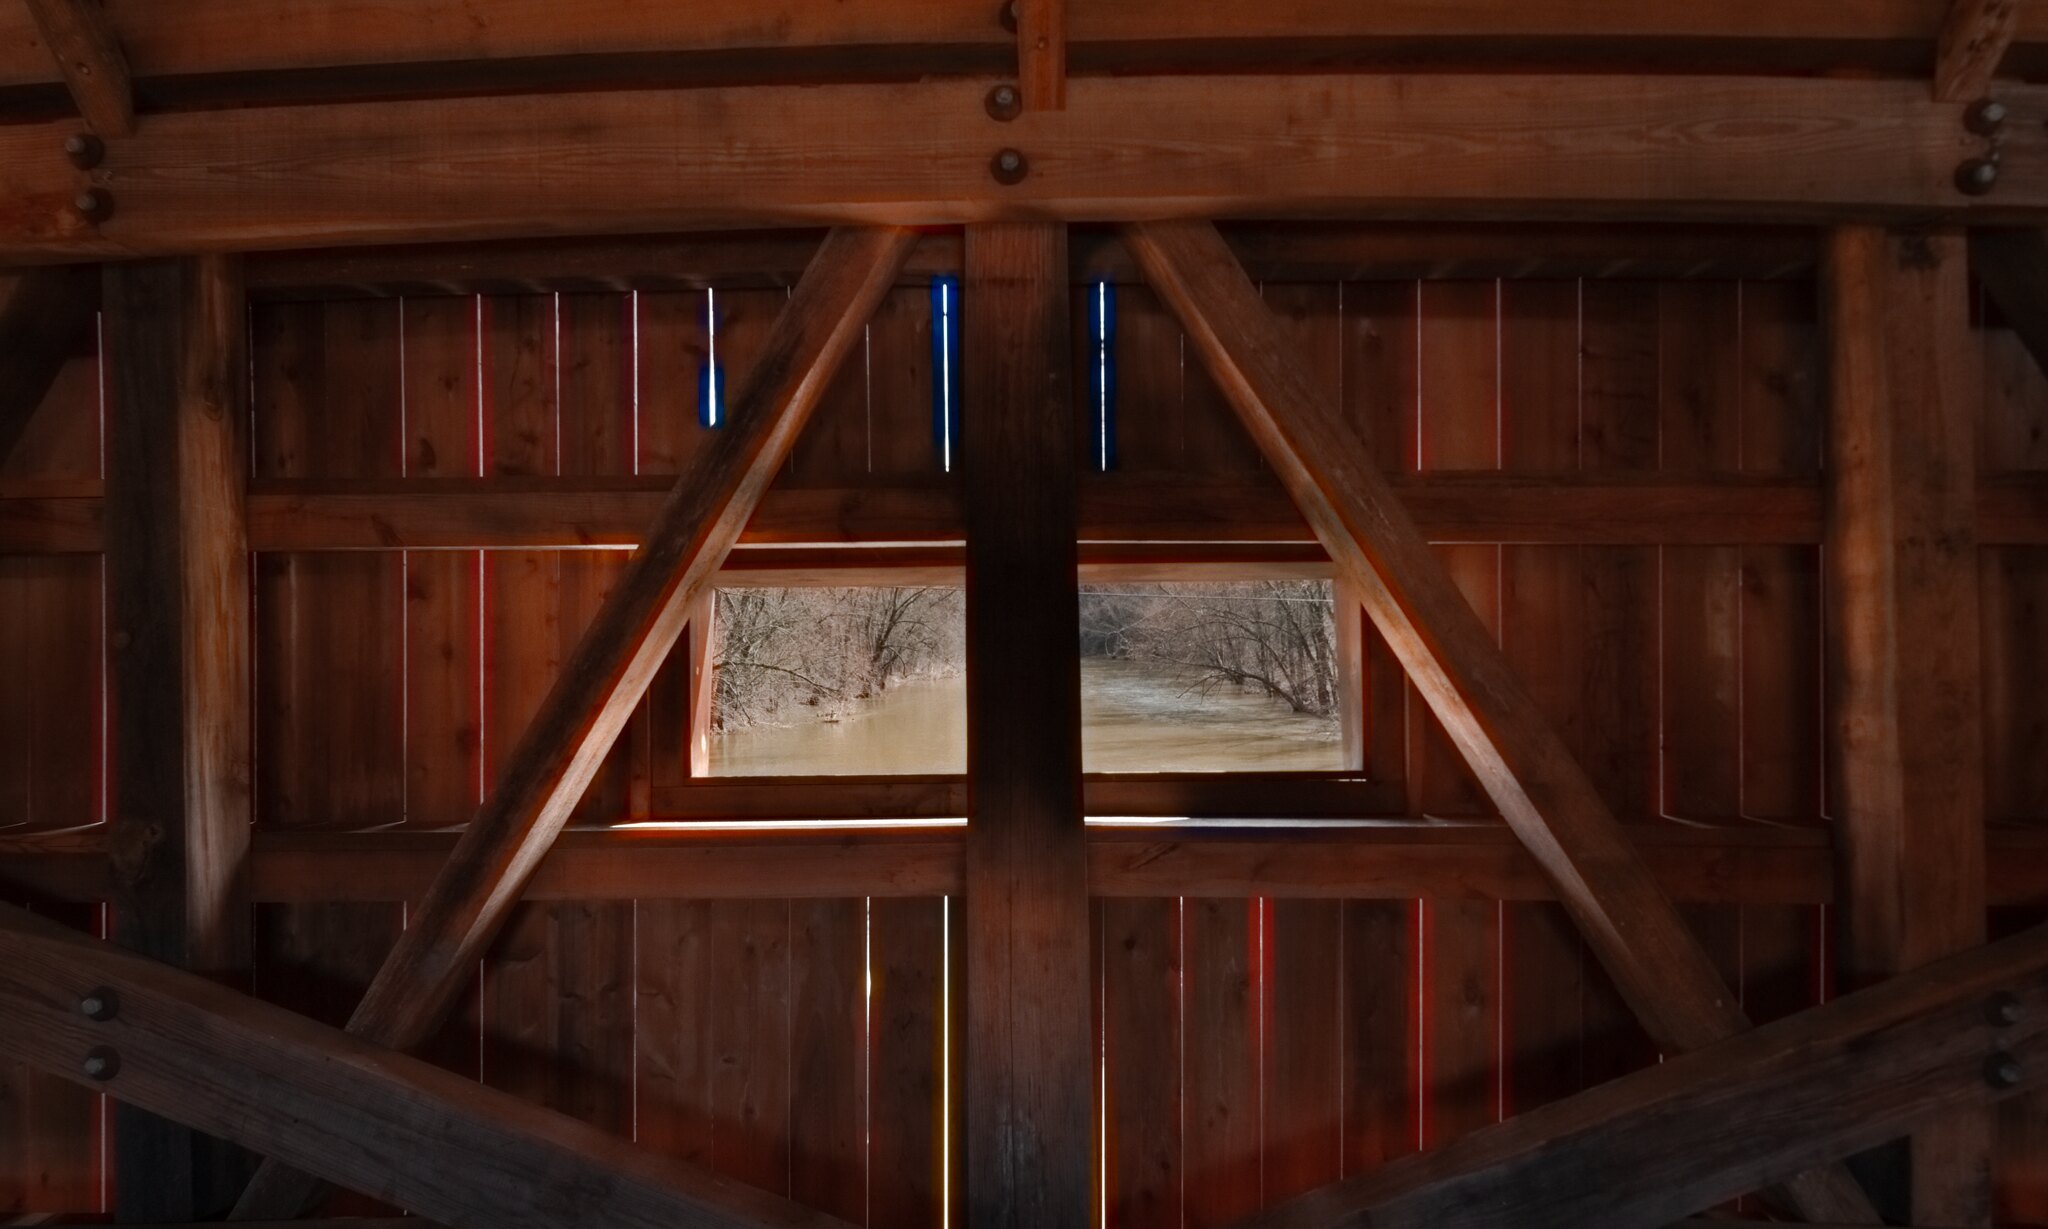  Inside the Dellville Covered Bridge in Wheatfield Township, Perry County, PA. Rebuilt in 2019 after arson destroyed it in 2014. 